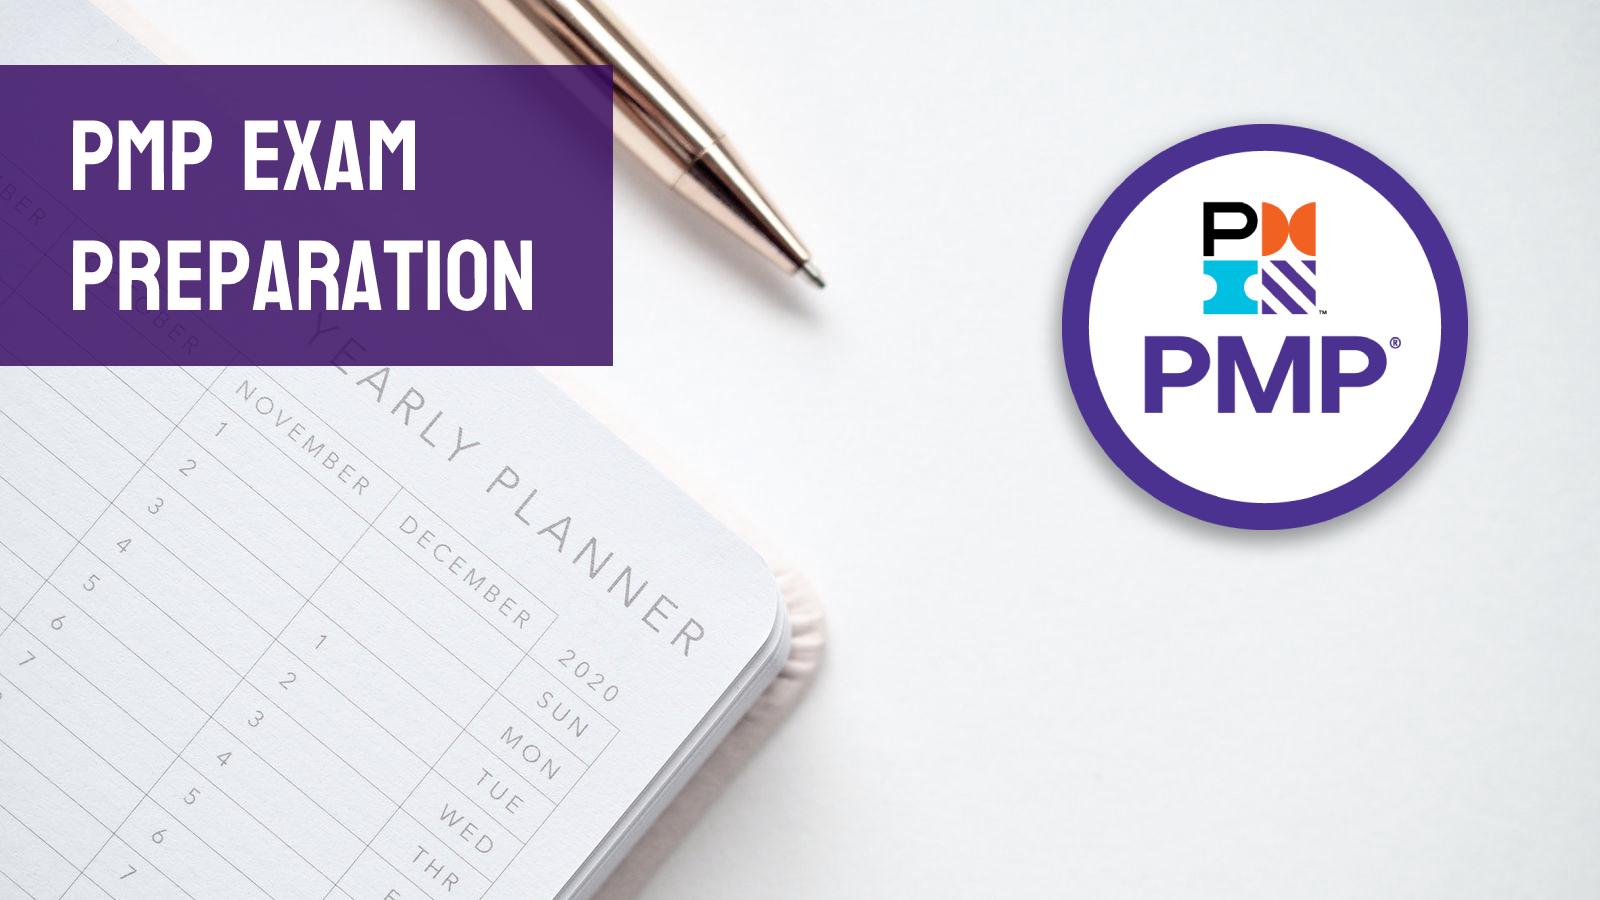 The ultimate guide to prepare for the project management professional (PMP) certification exam.